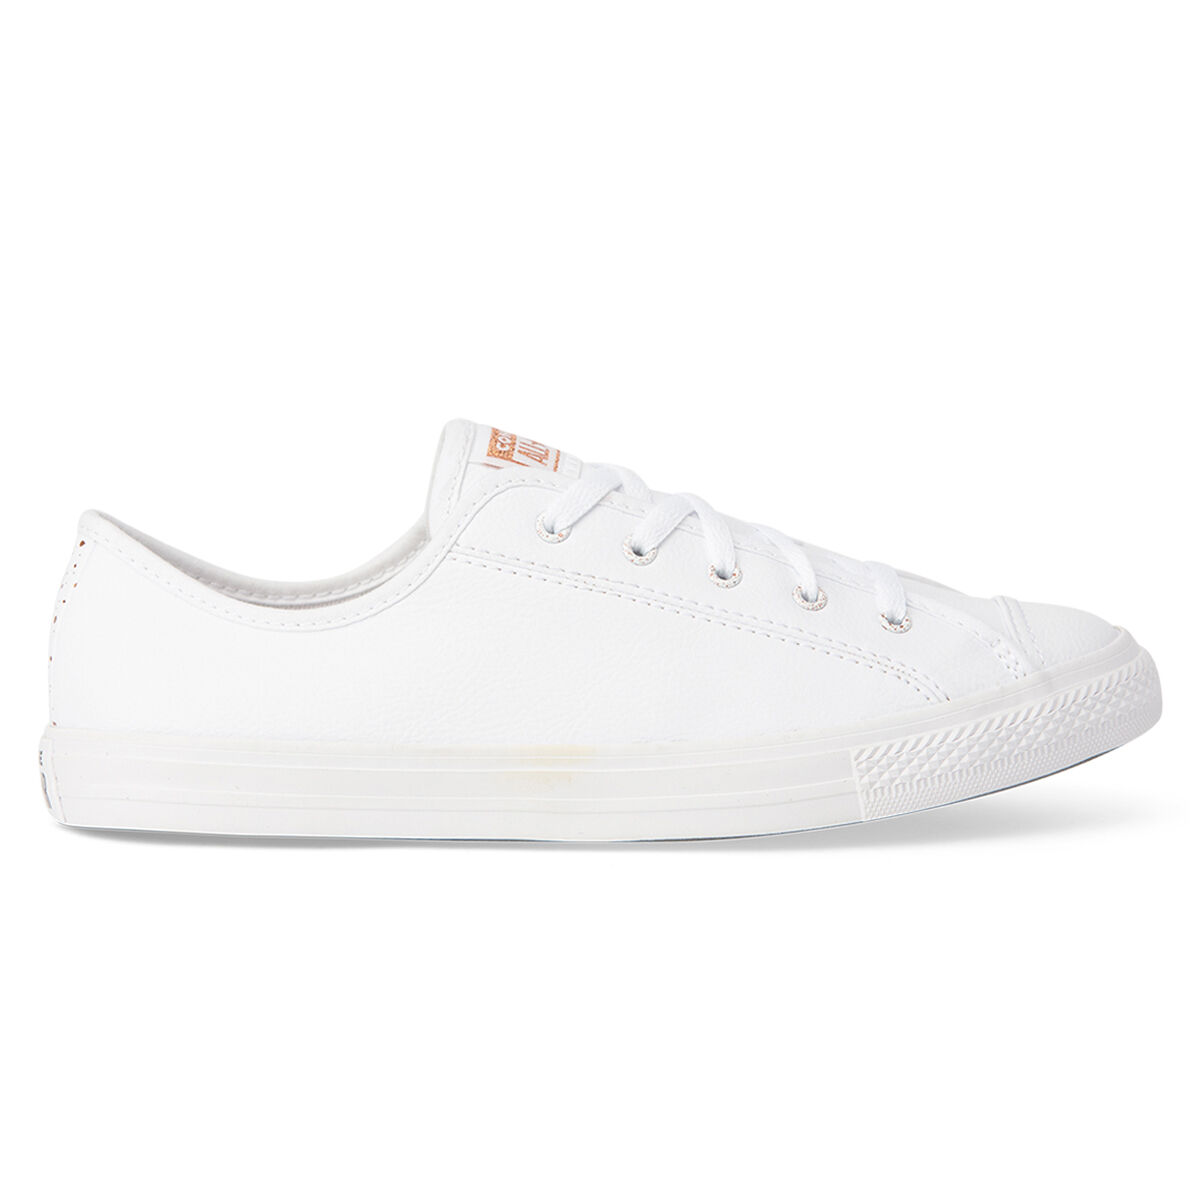 converse all star dainty low